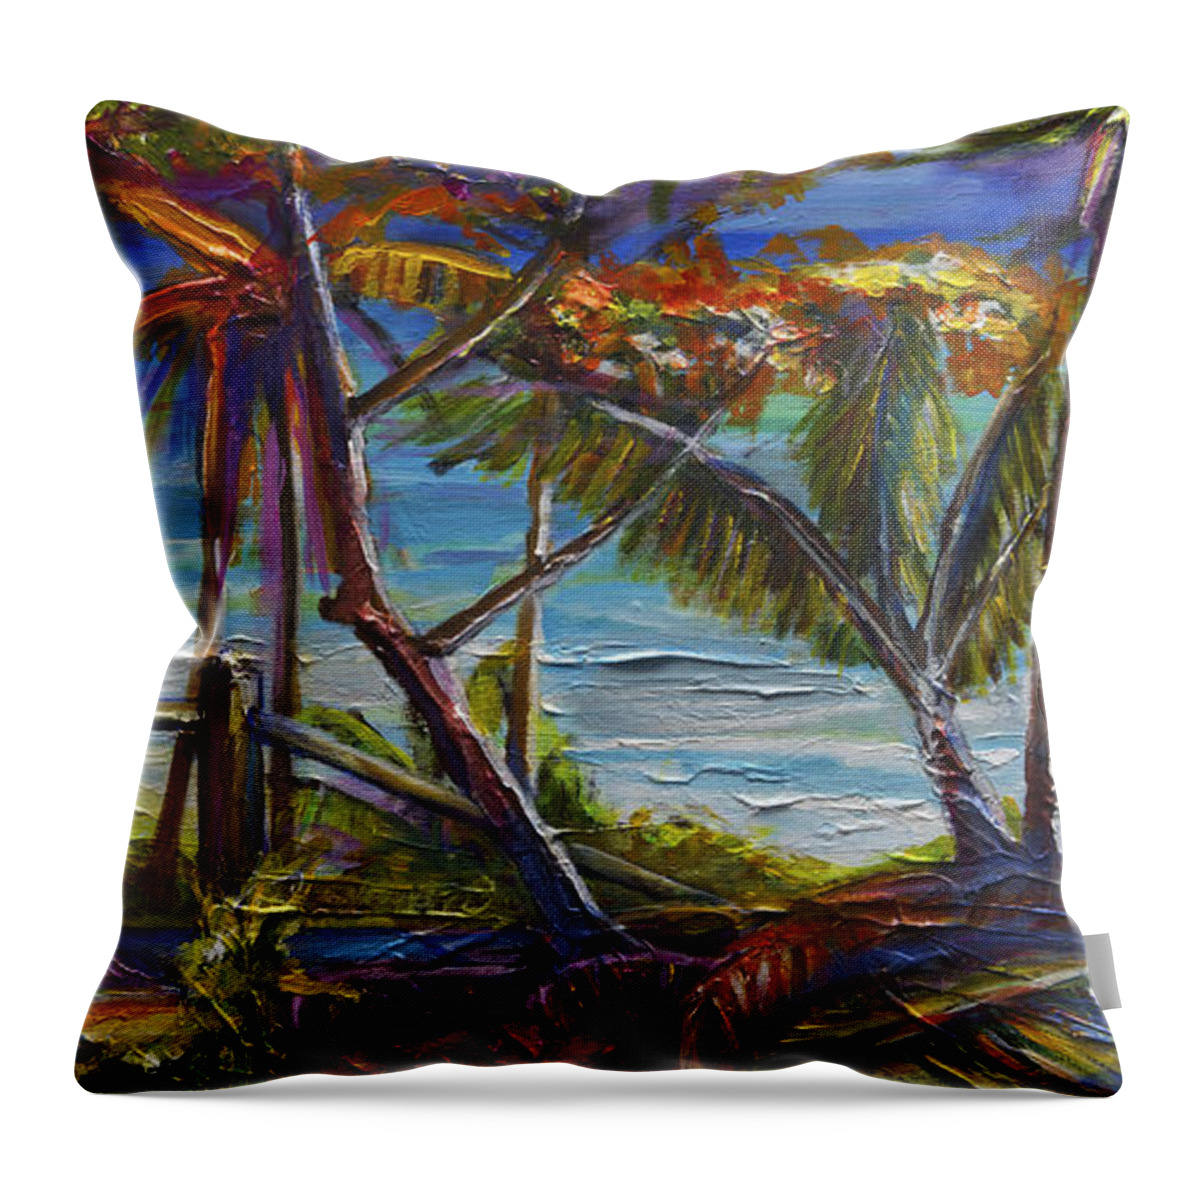 Blanchisseuse Throw Pillow featuring the painting Blanchisseuse Lahay by Cynthia McLean